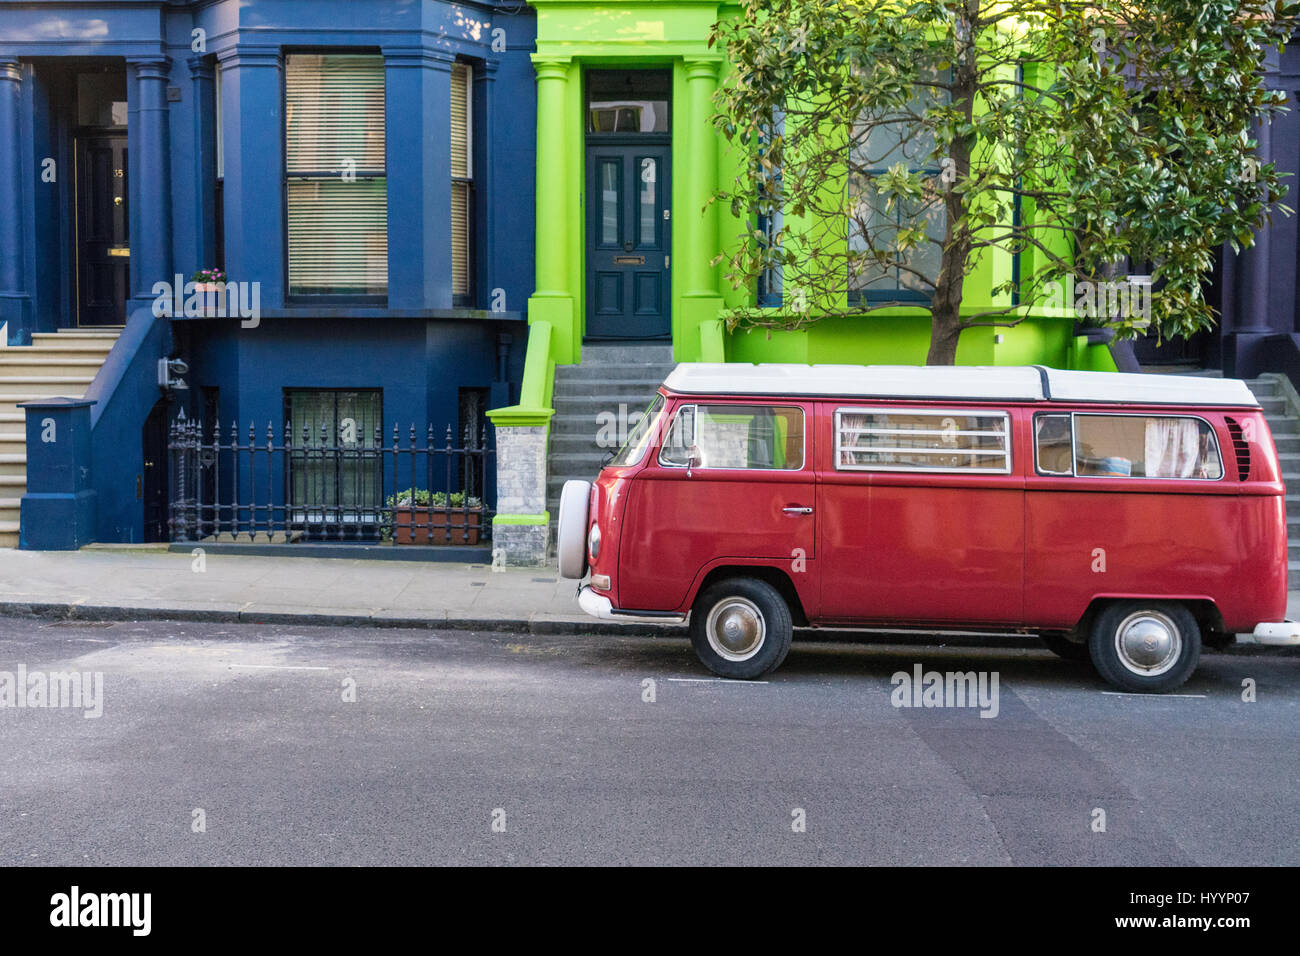 London - March 30: Colorful blue and green town houses and red oldtimer Volkswagen bus in Notting Hill on March 30, 2017. Stock Photo